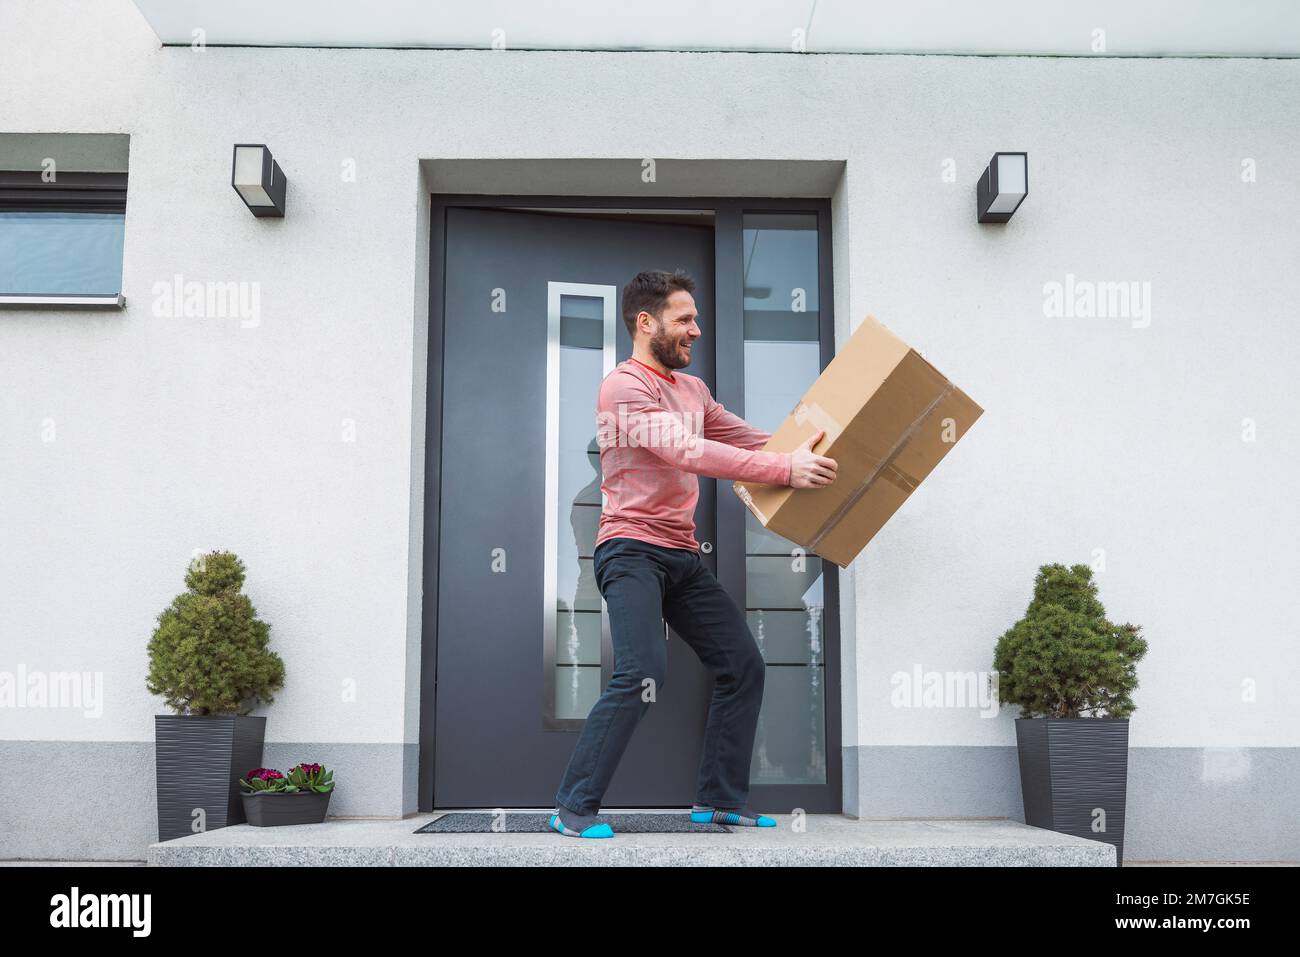 Thrilled man holding a big cardboard box that just came in the mail while standing outside the front door Stock Photo